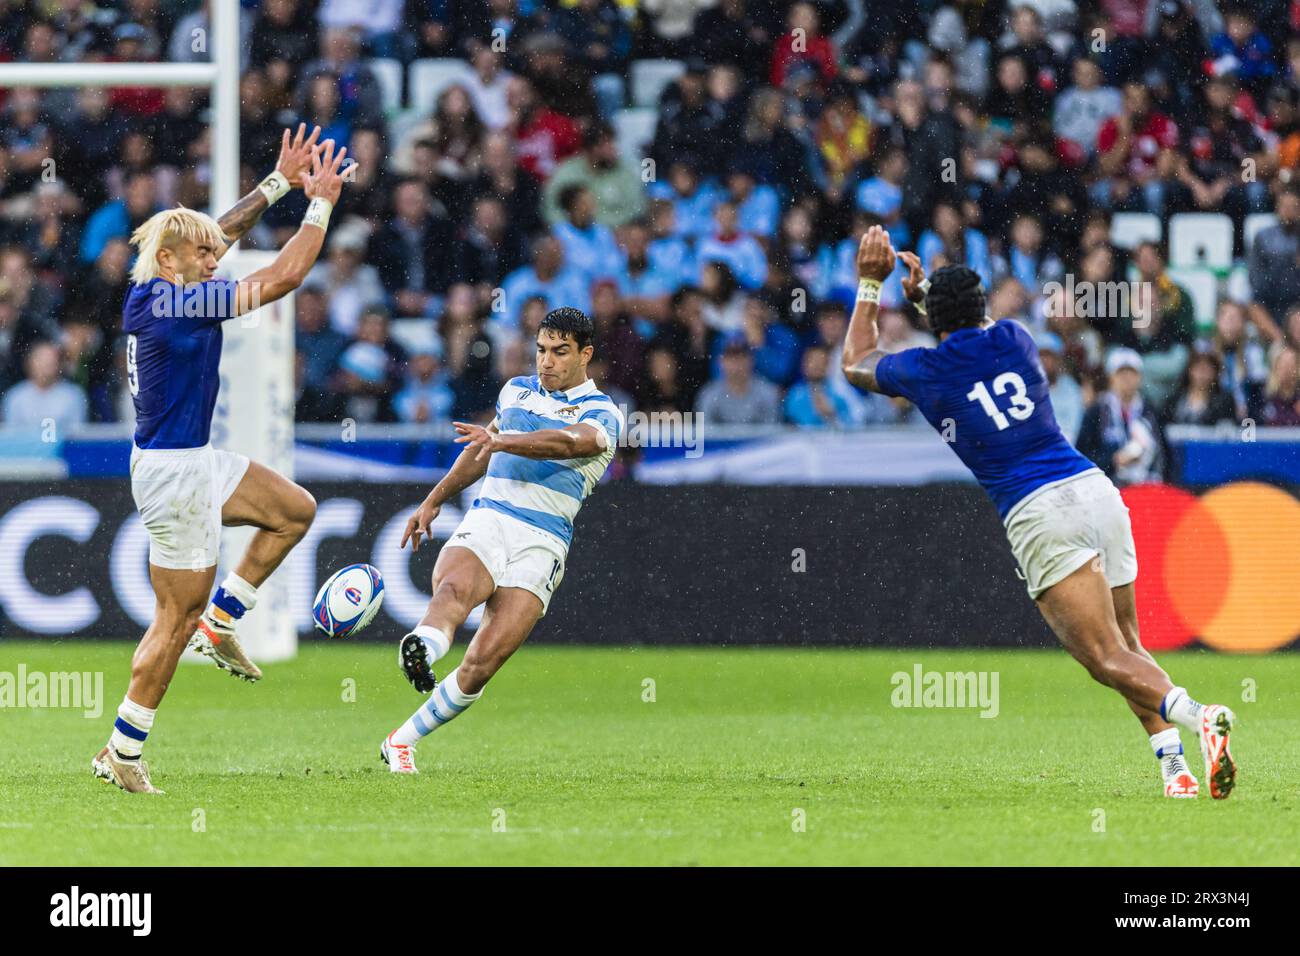 Saint-Étienne, France. 22nd September, 2023. Santiago Carreras of Argentina kicks the ball during the Rugby World Cup Pool D match between Argentina and Samoa at Stade Geoffroy-Guichard. Credit: Mateo Occhi (Sporteo) / Alamy Live News Stock Photo